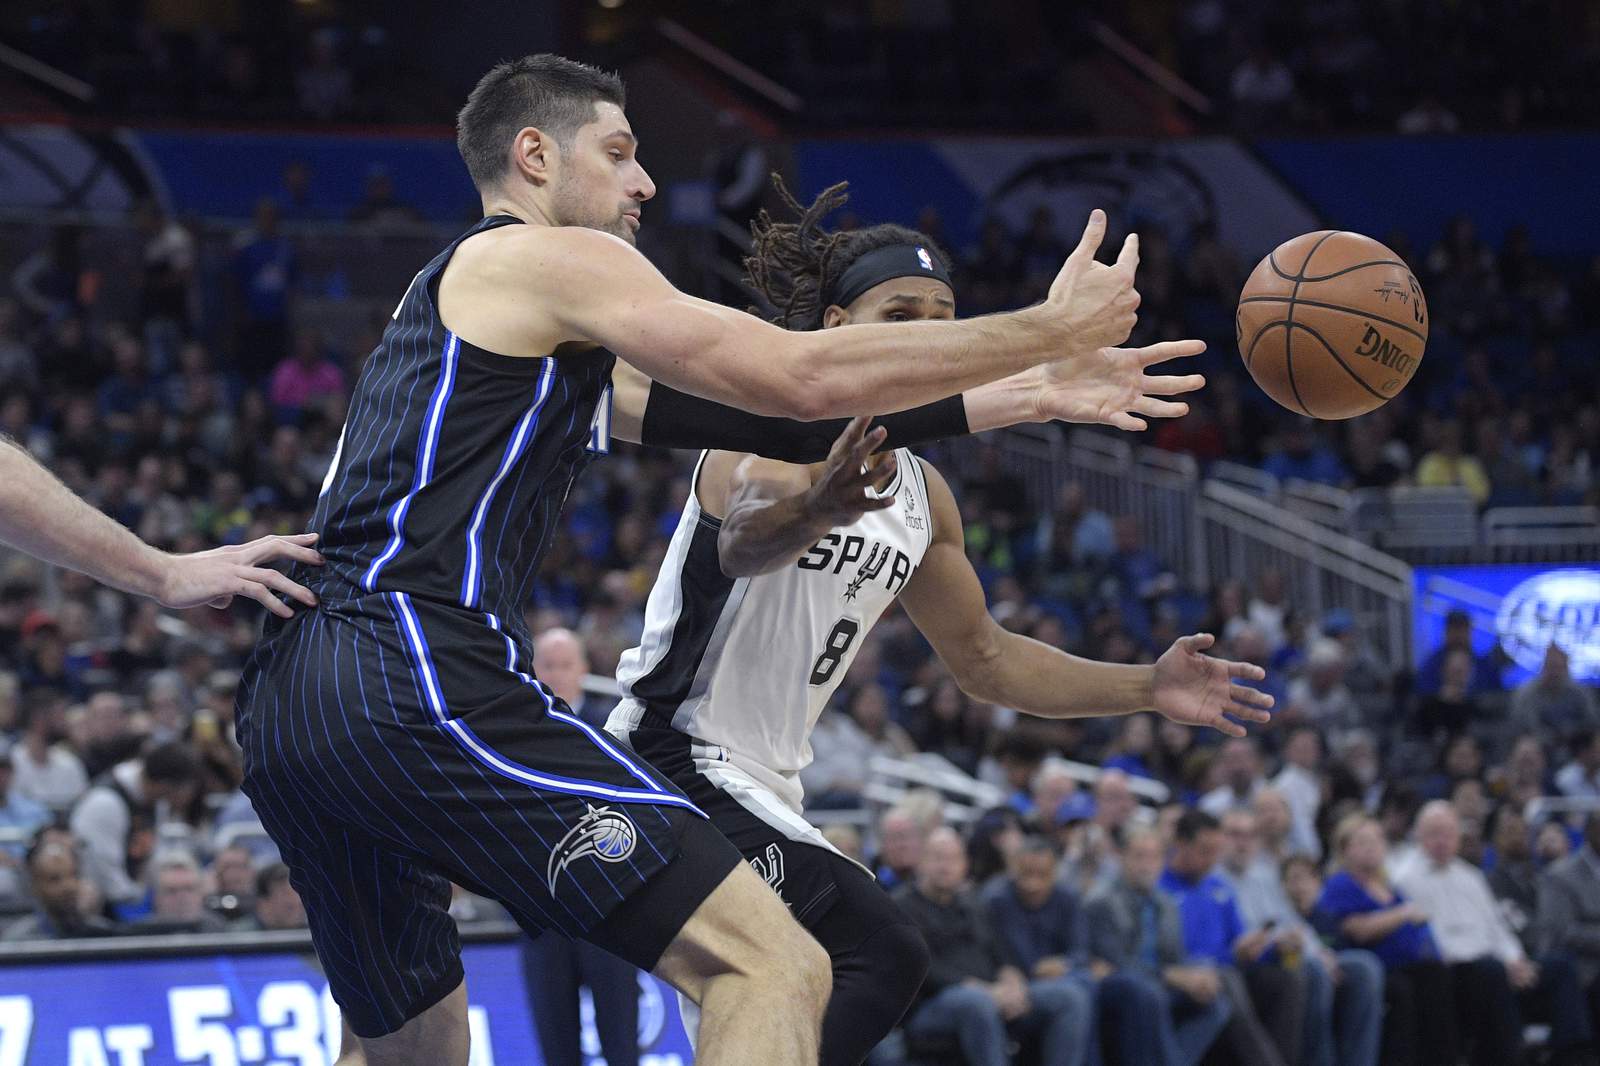 Spurs reportedly have ‘significant interest’ in trading for Orlando Magic all-star center Vucevic